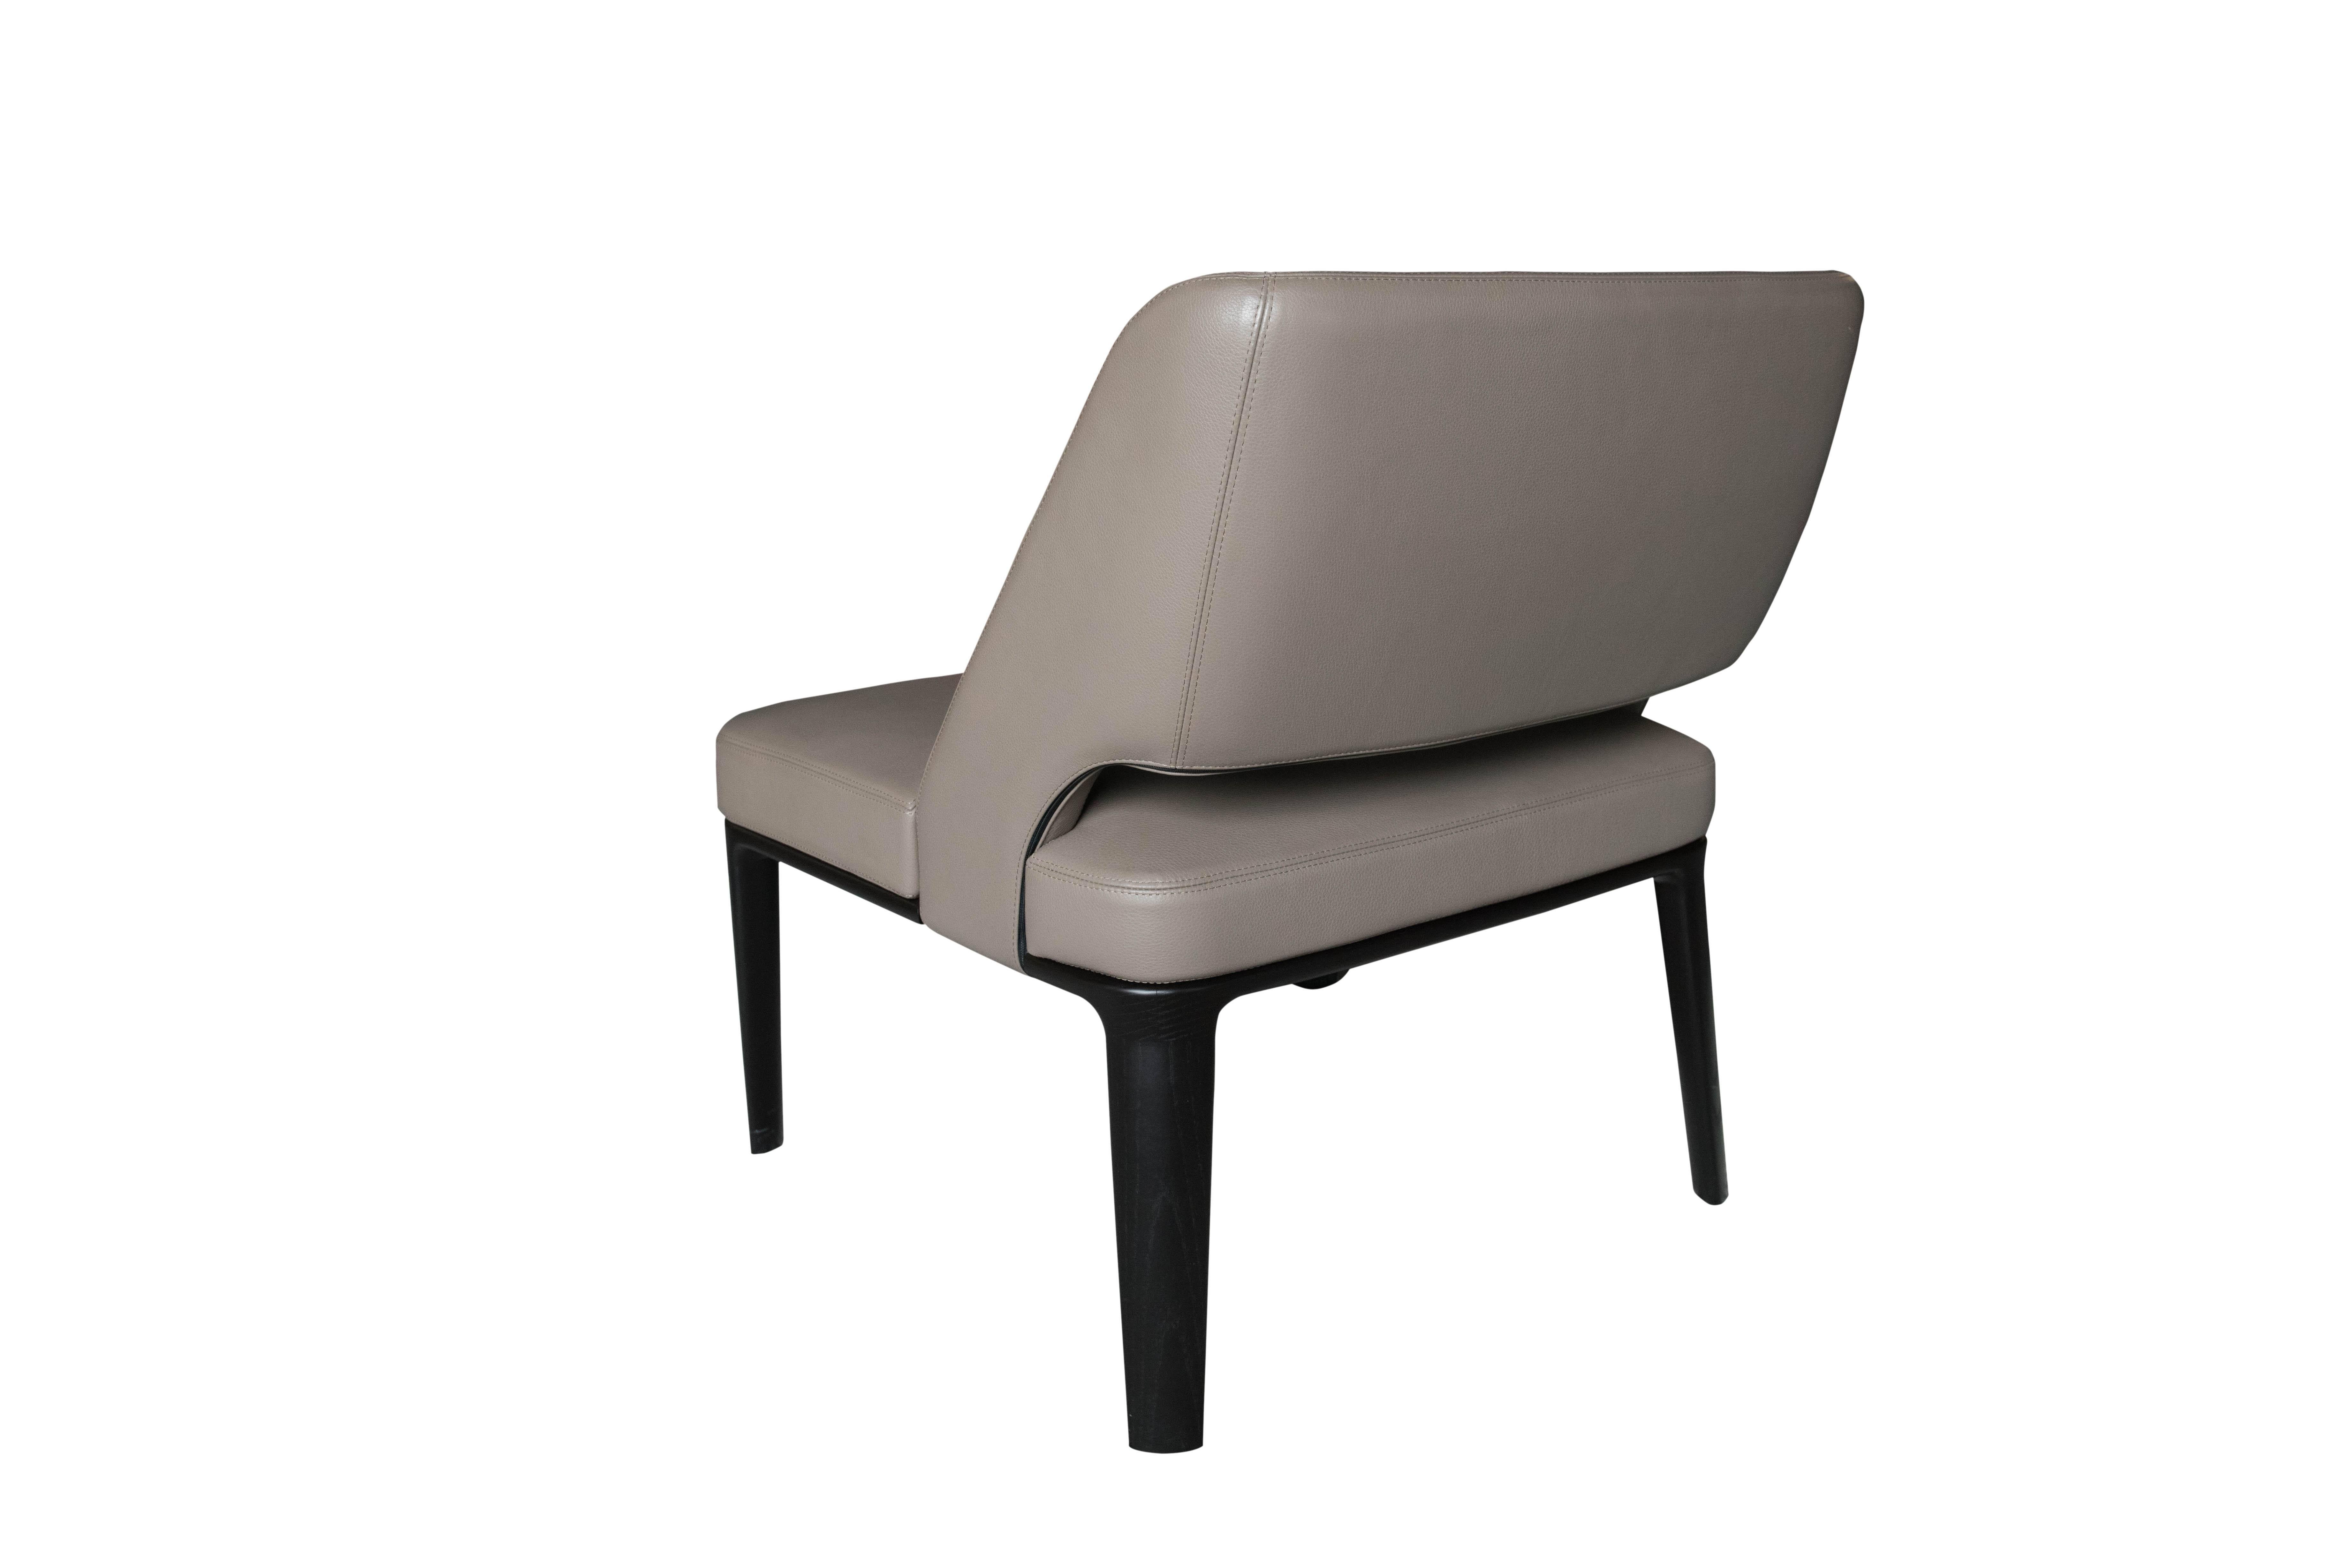 Structure: Metal, seat suspension is
provided by elastic straps with a high
rubber content, let into fireproof polyurethane
foam.

Covers: Non-removable leather
covers.

Base: Solid ash with open-pore moka
lacquered finish, assembled by